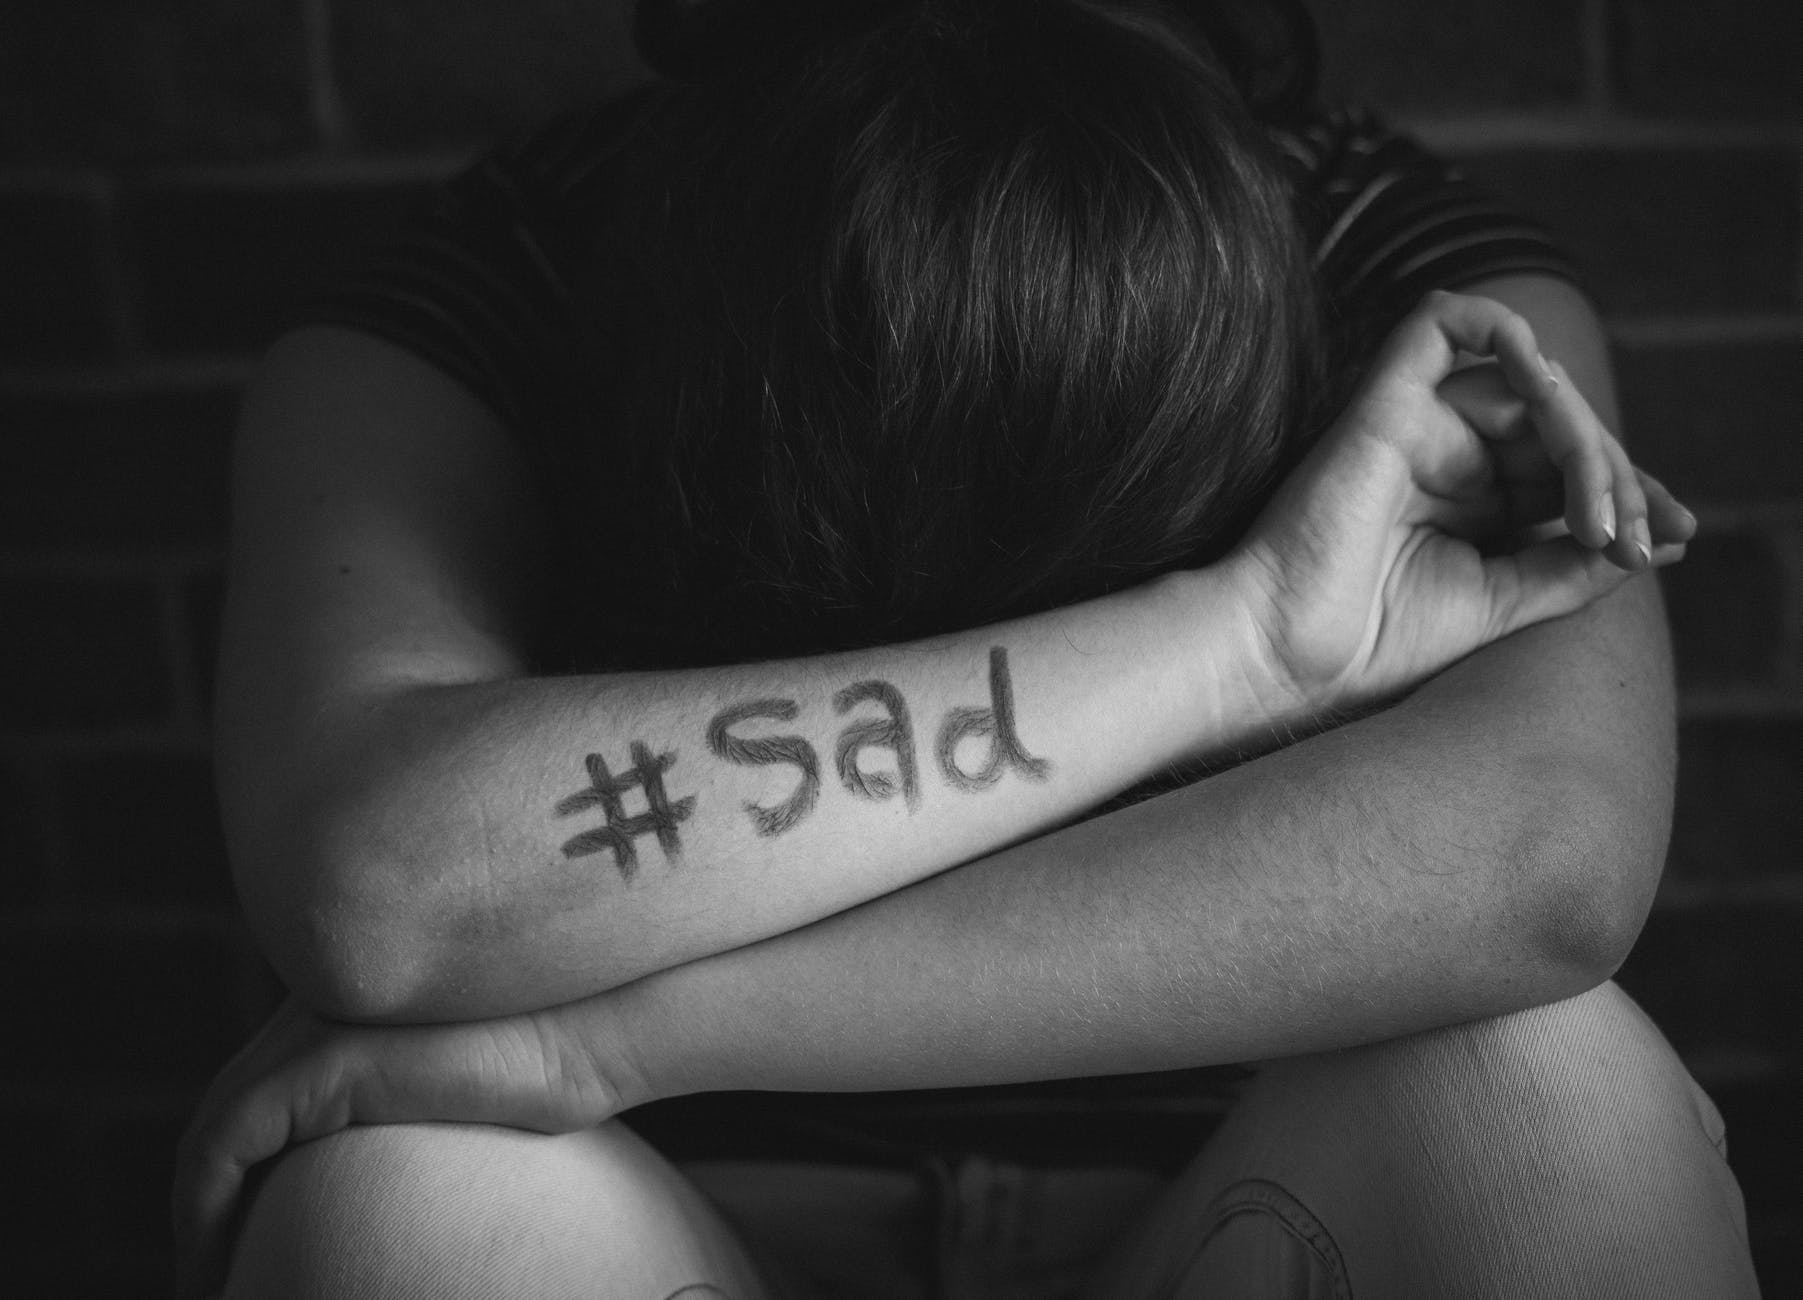 person leans on arms with sad text